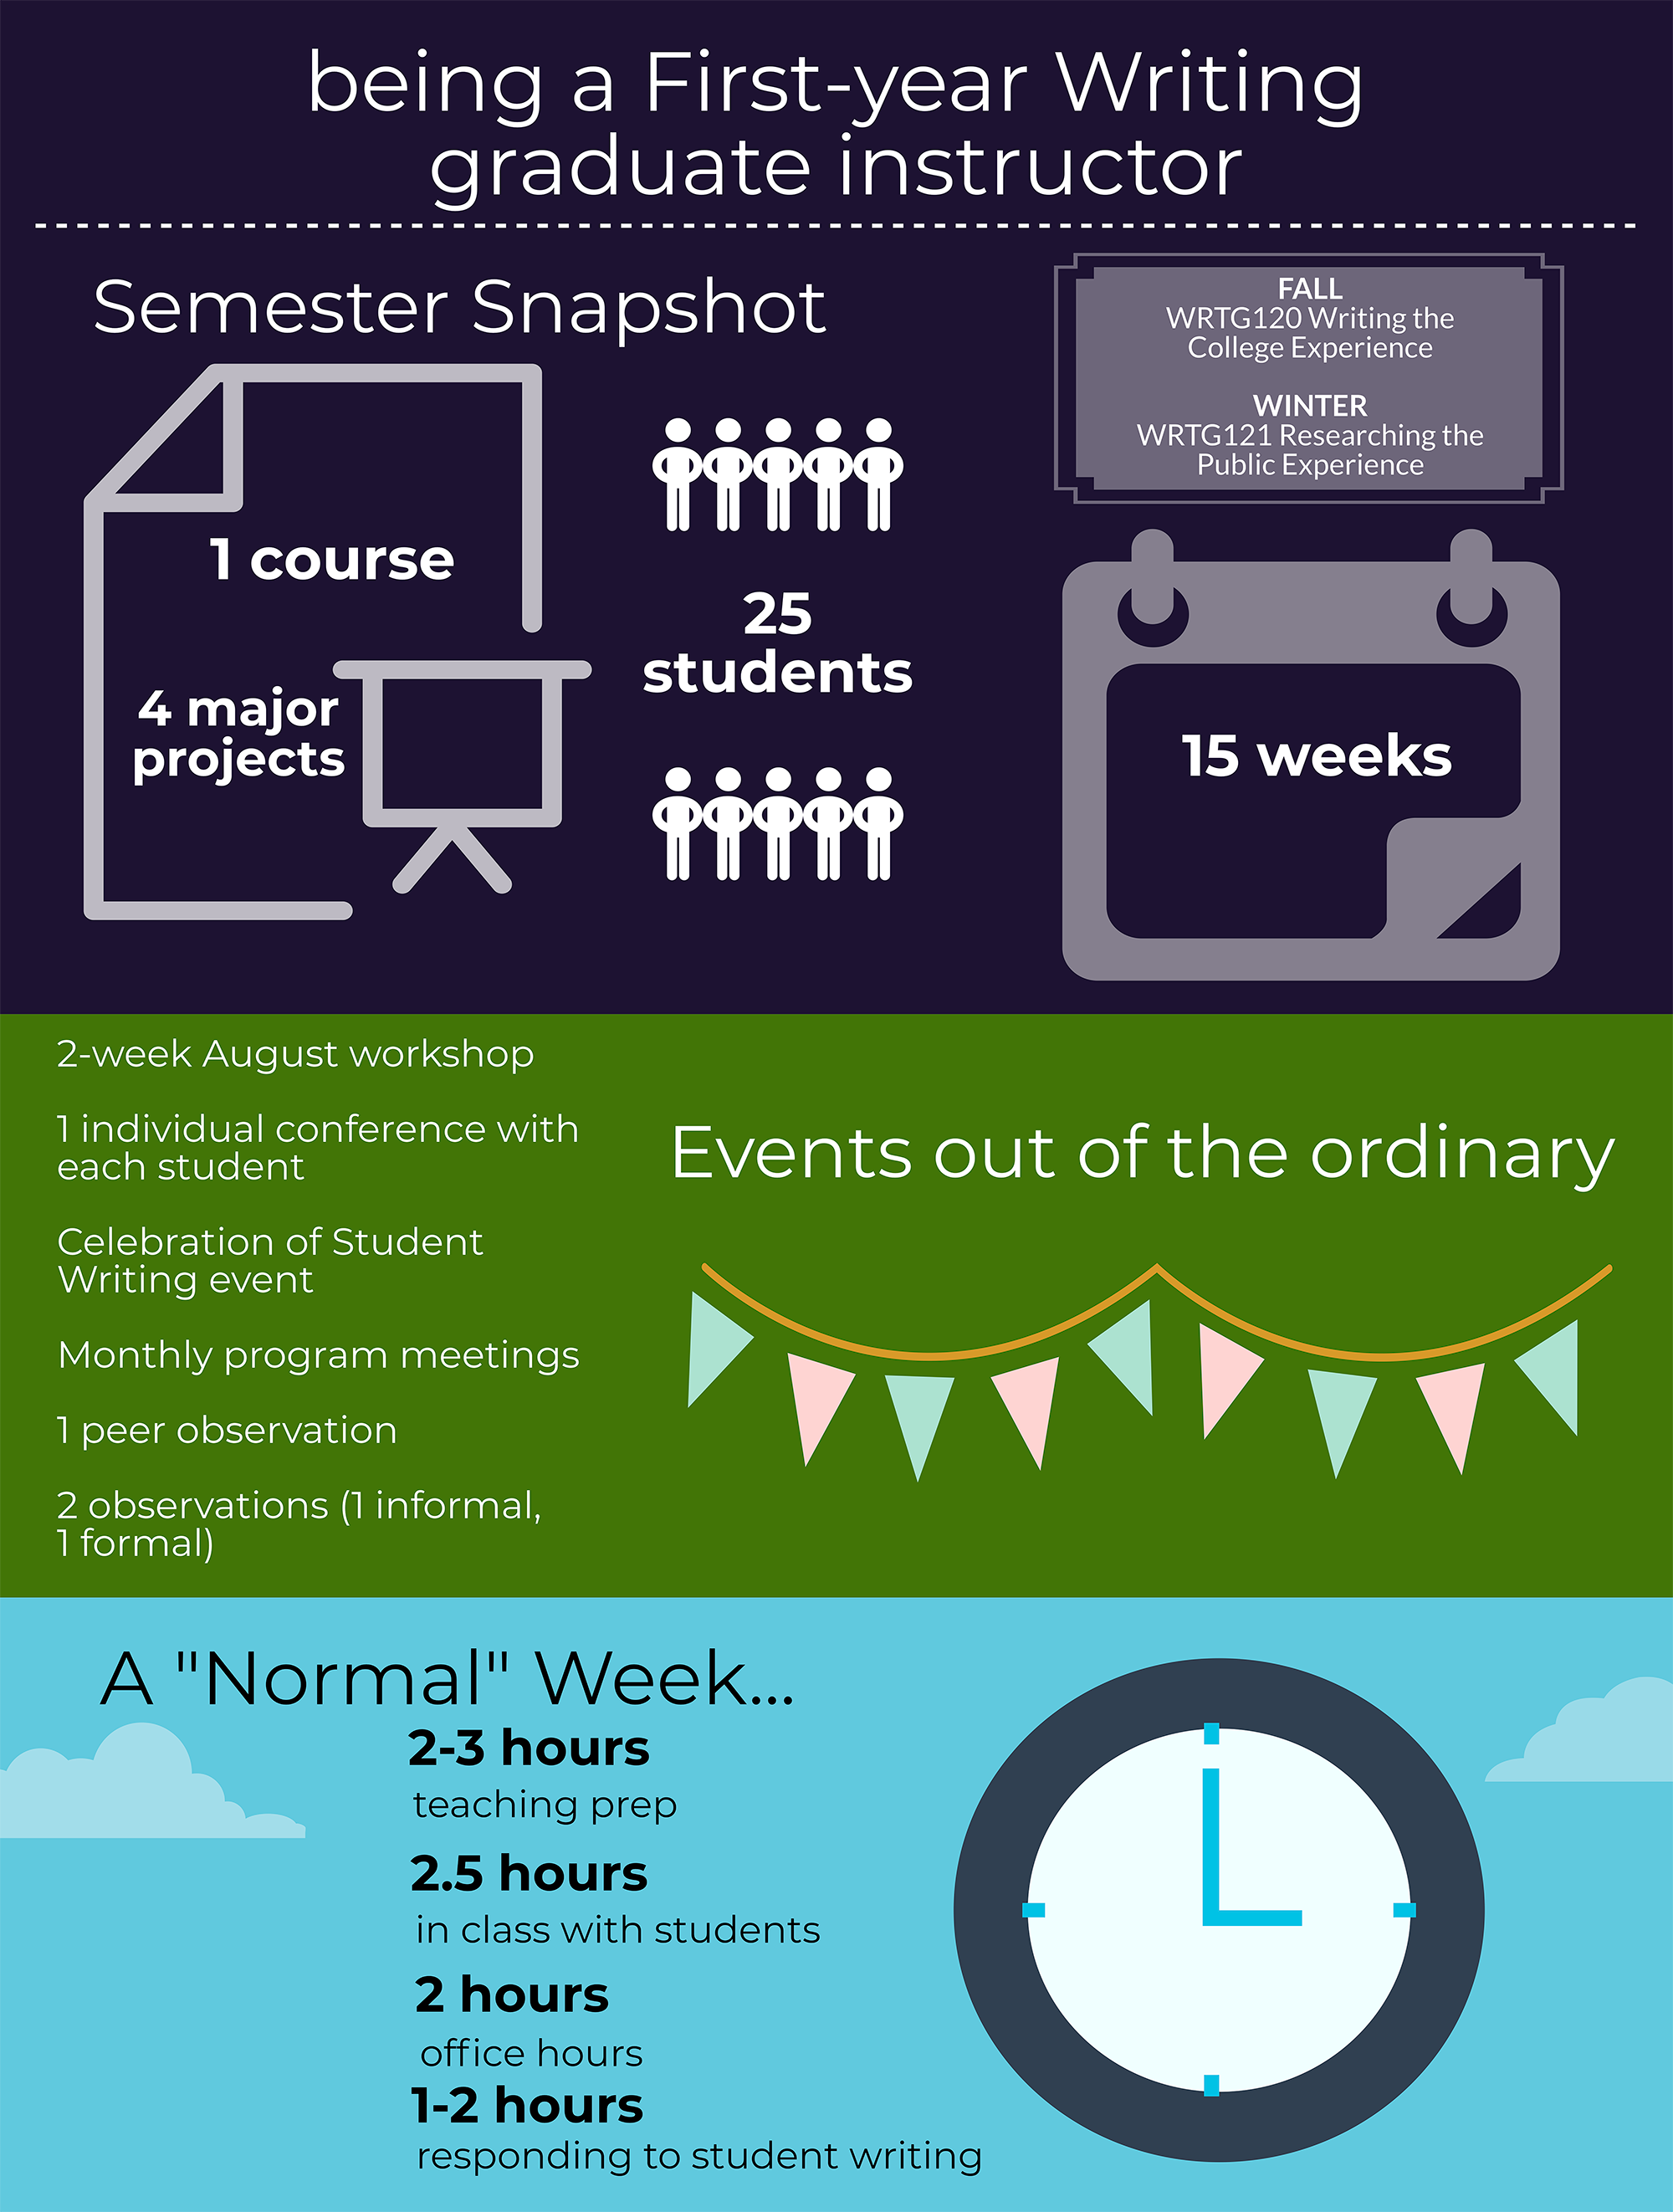 Figure 3. An 8 x 11.5 infographic arranged in 3 sections: Semester Snapshot includes names of writing courses, number of students, and illustration of student body silhouettes; Events out of the ordinary lists student conferences and teacher observations; and a “Normal” Week details the number of hours spent each week on teaching writing activities, on a blue sky background alongside an illustration of a clock.